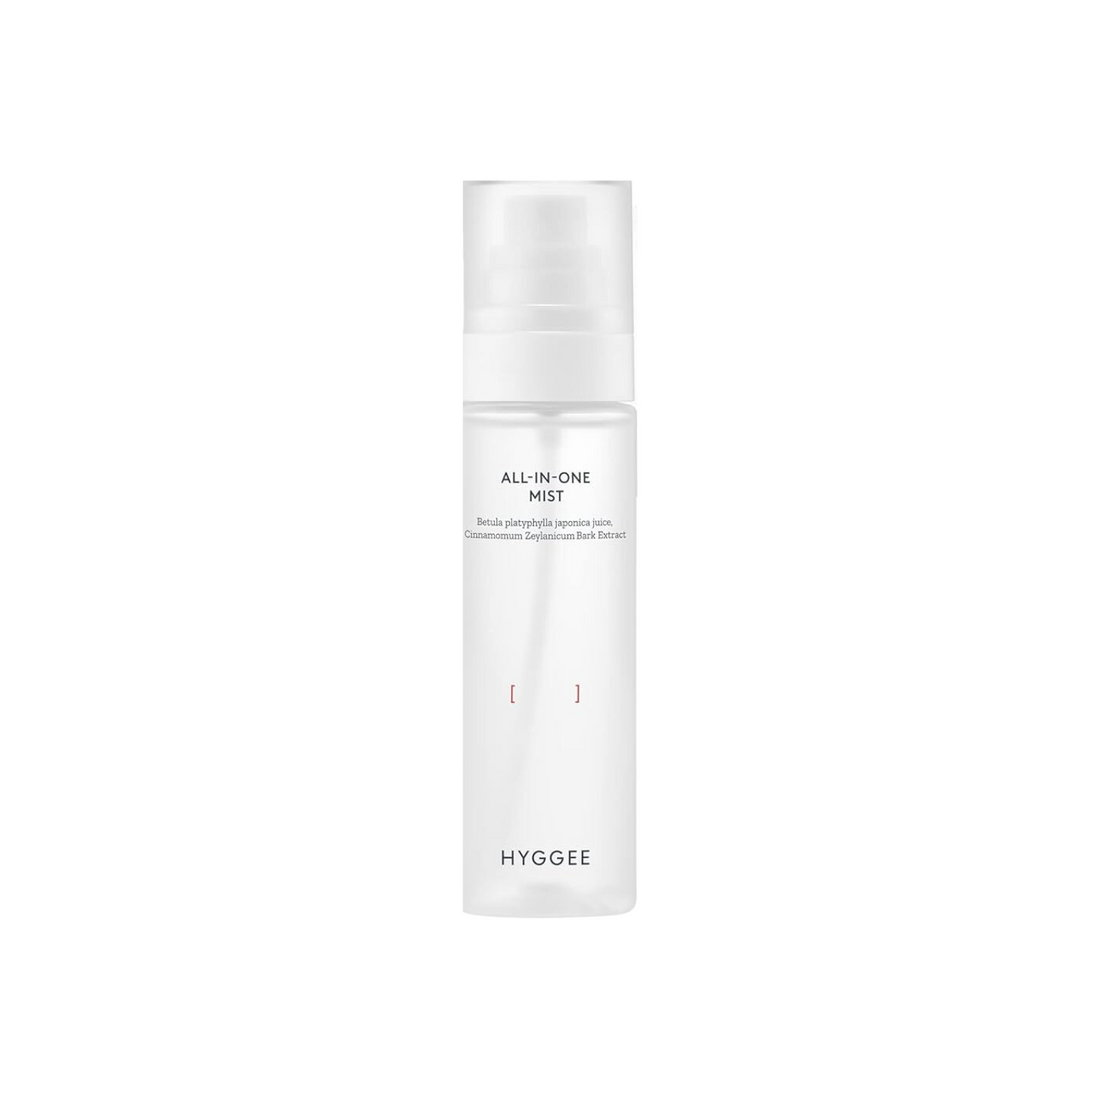 Hyggee All-In-One Mist